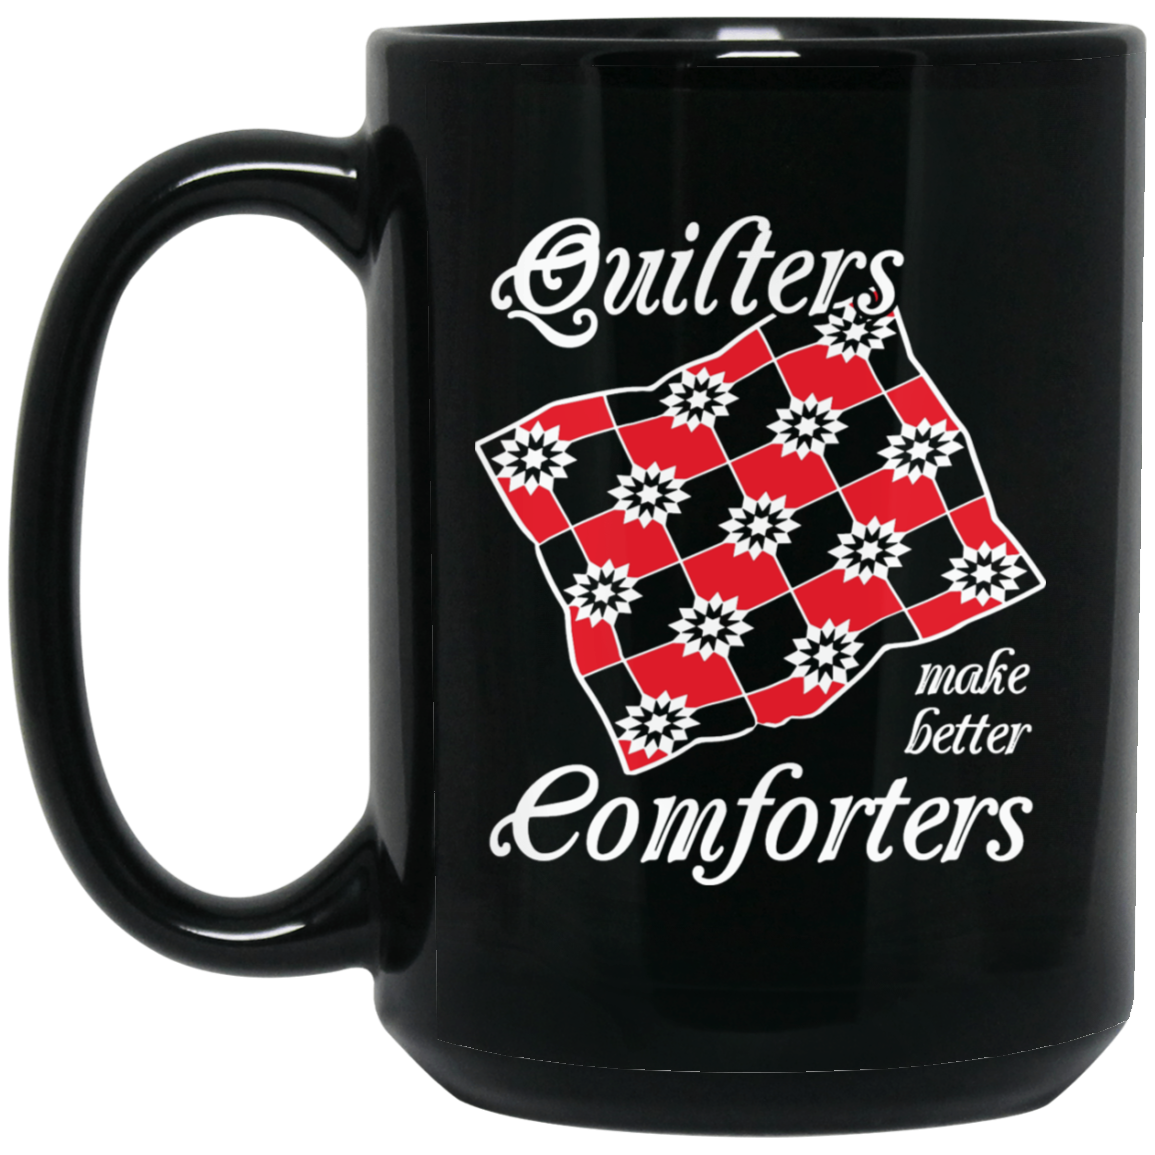 Quilters Make Better Comforters (red) Black Mugs